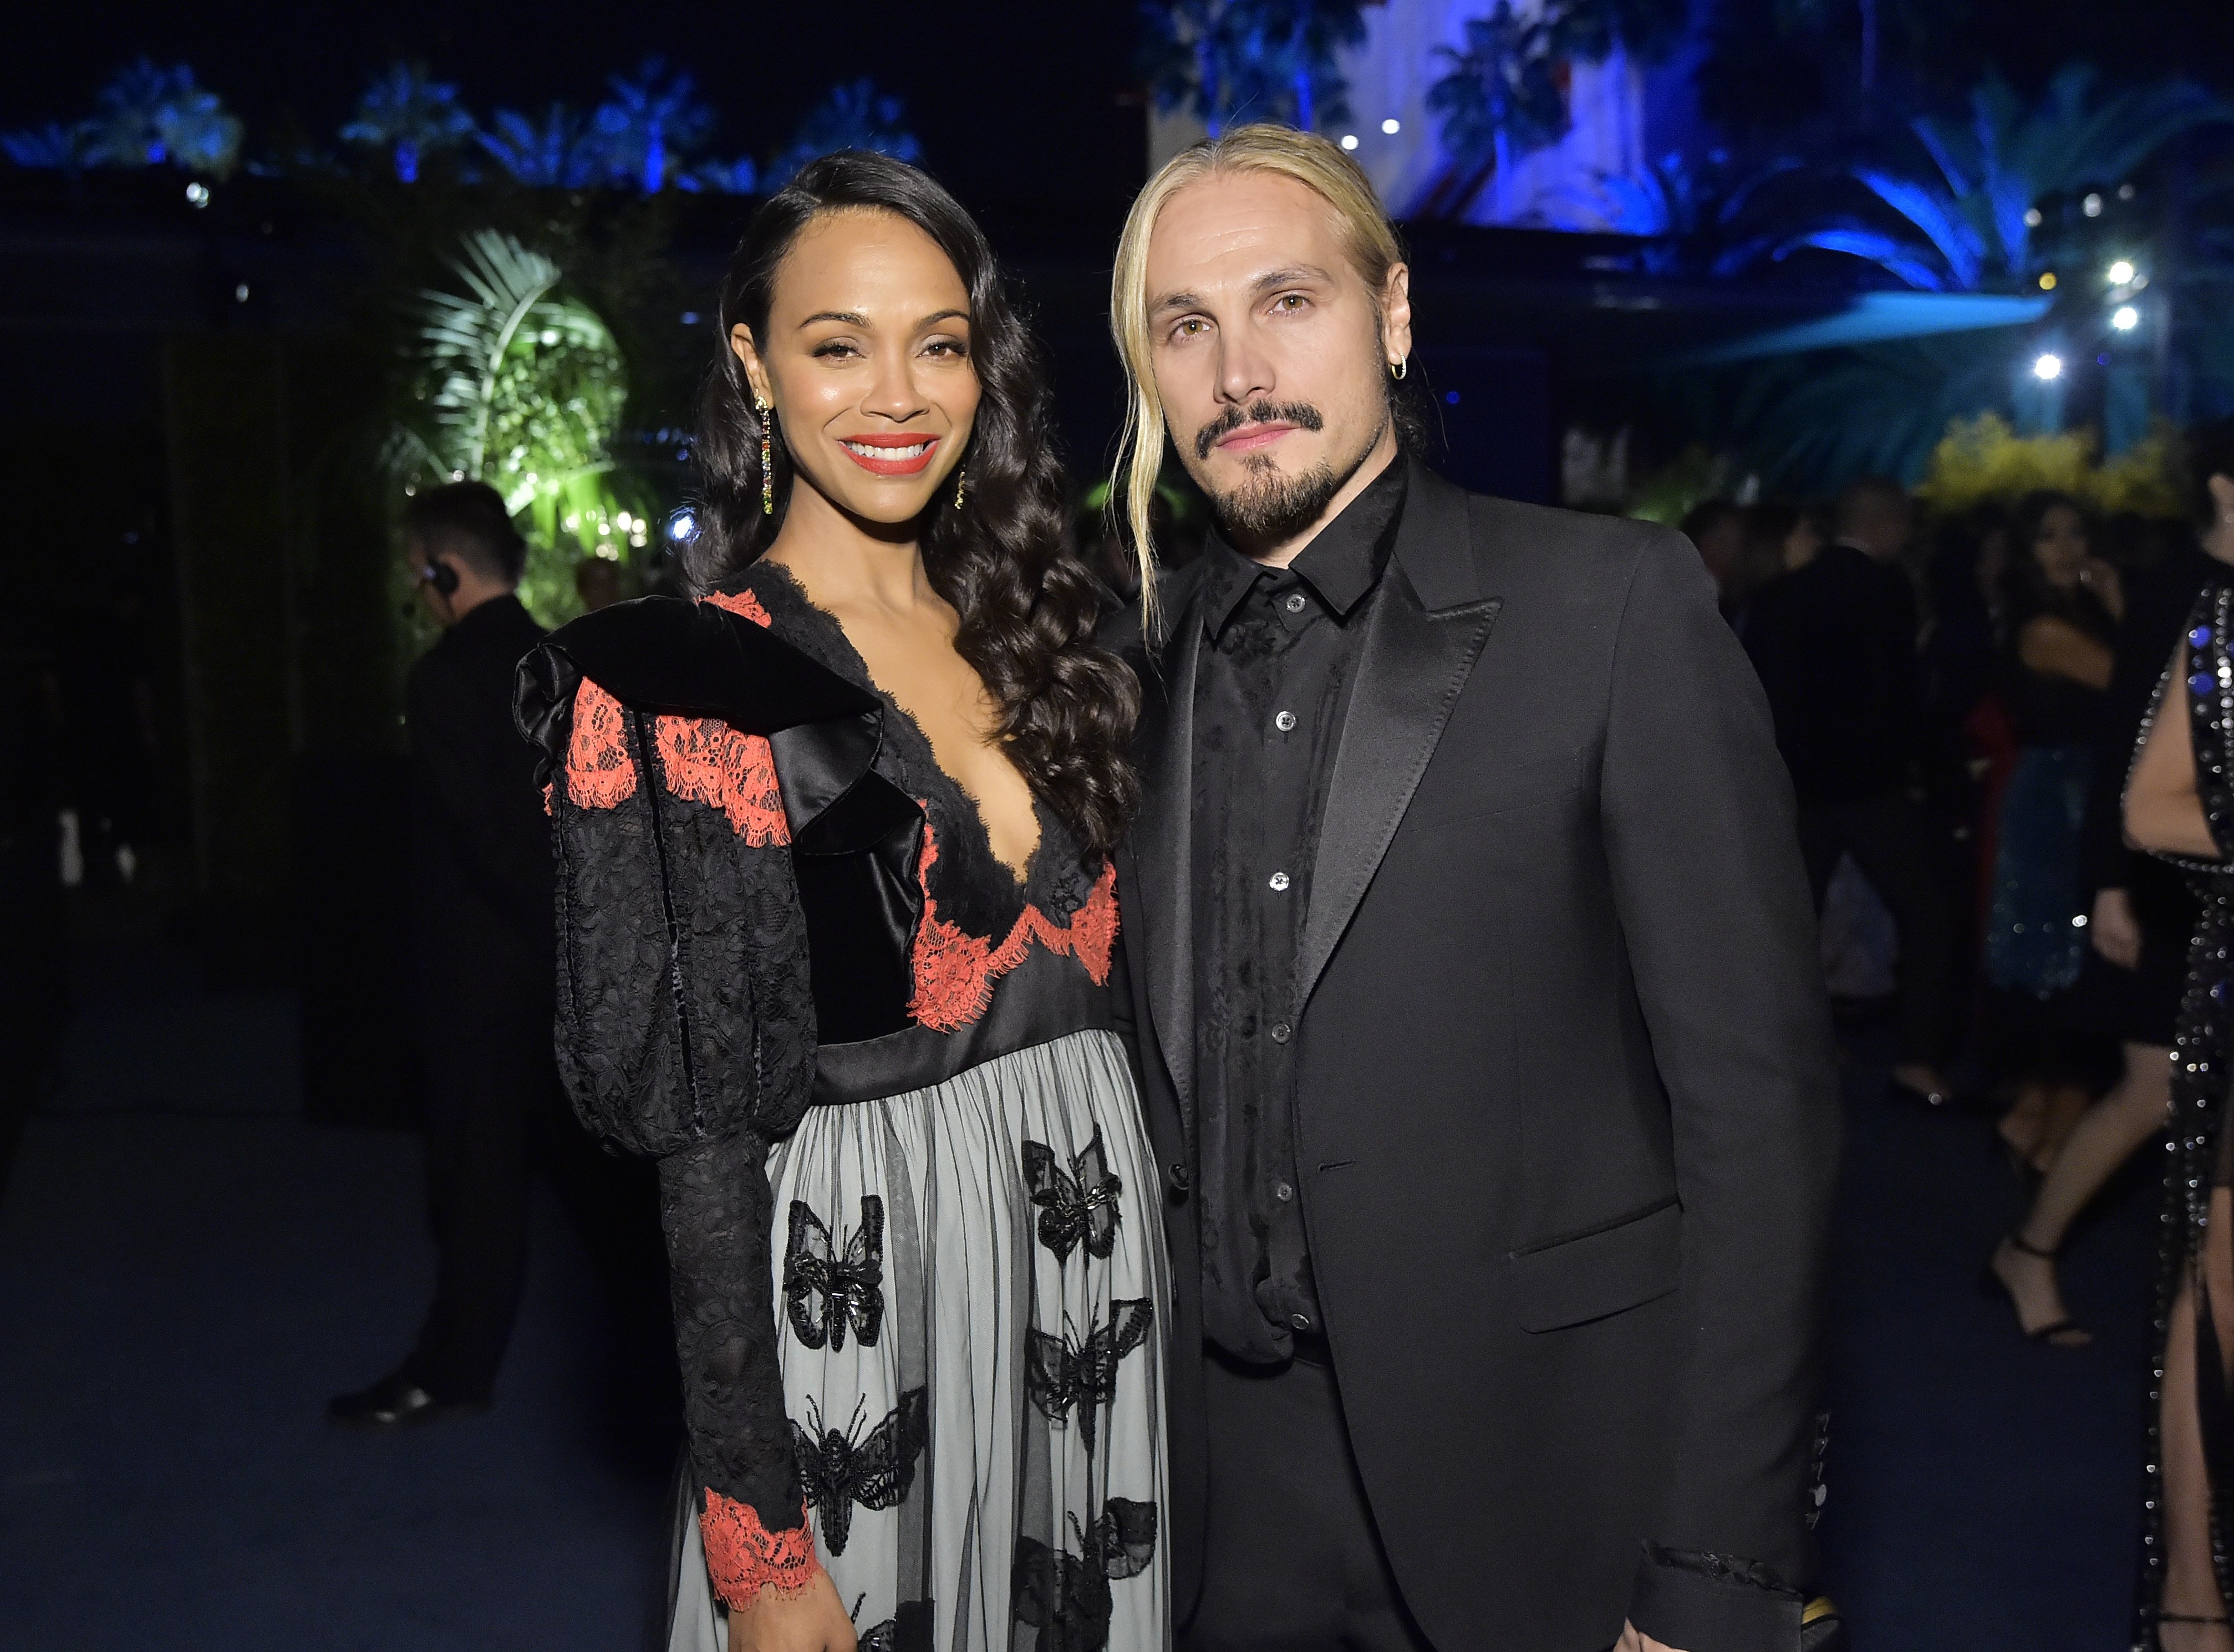 Zoe and Marco Perego Saldana attend the 2019 LACMA Art + Film Gala Presented By Gucci at LACMA on November 2, 2019, in Los Angeles, California. | Source: Getty Images